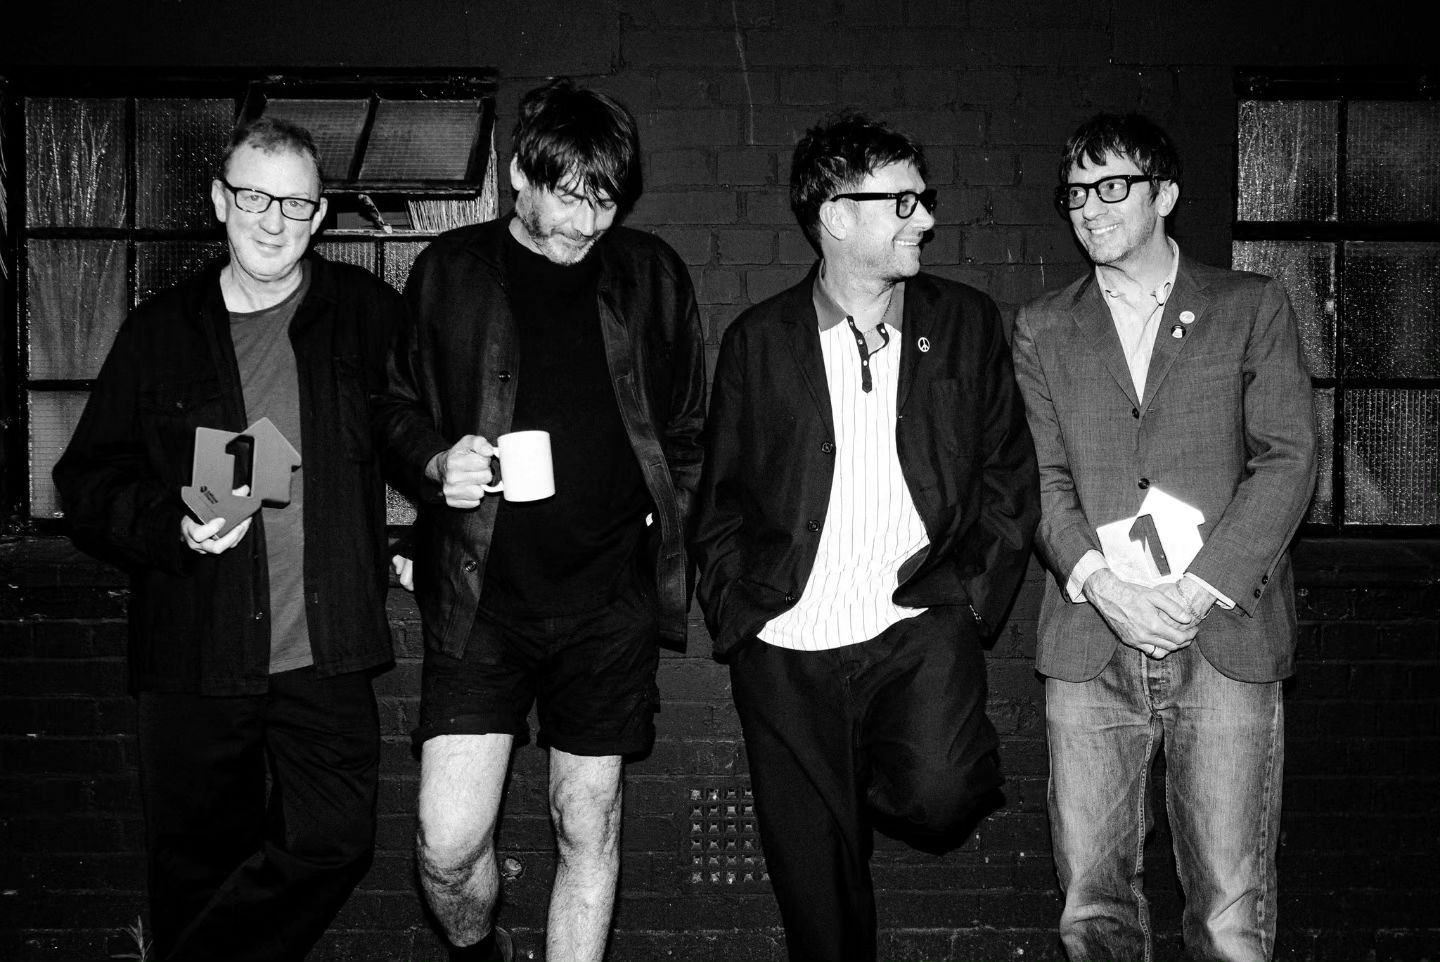 Let's celebrate Blur on their Official Charts Number 1 album, 'The Ballad of Darren'. 

This marks their seventh number 1 album, consistently hitting the top spot since 1994.
Again, it's wonderful to be part of the journey. Matt Colton, who mastered this album, is also delighted with the news.  

Missed out? Check the  in our bio to catch a listen. 

📸: @shotbyphox